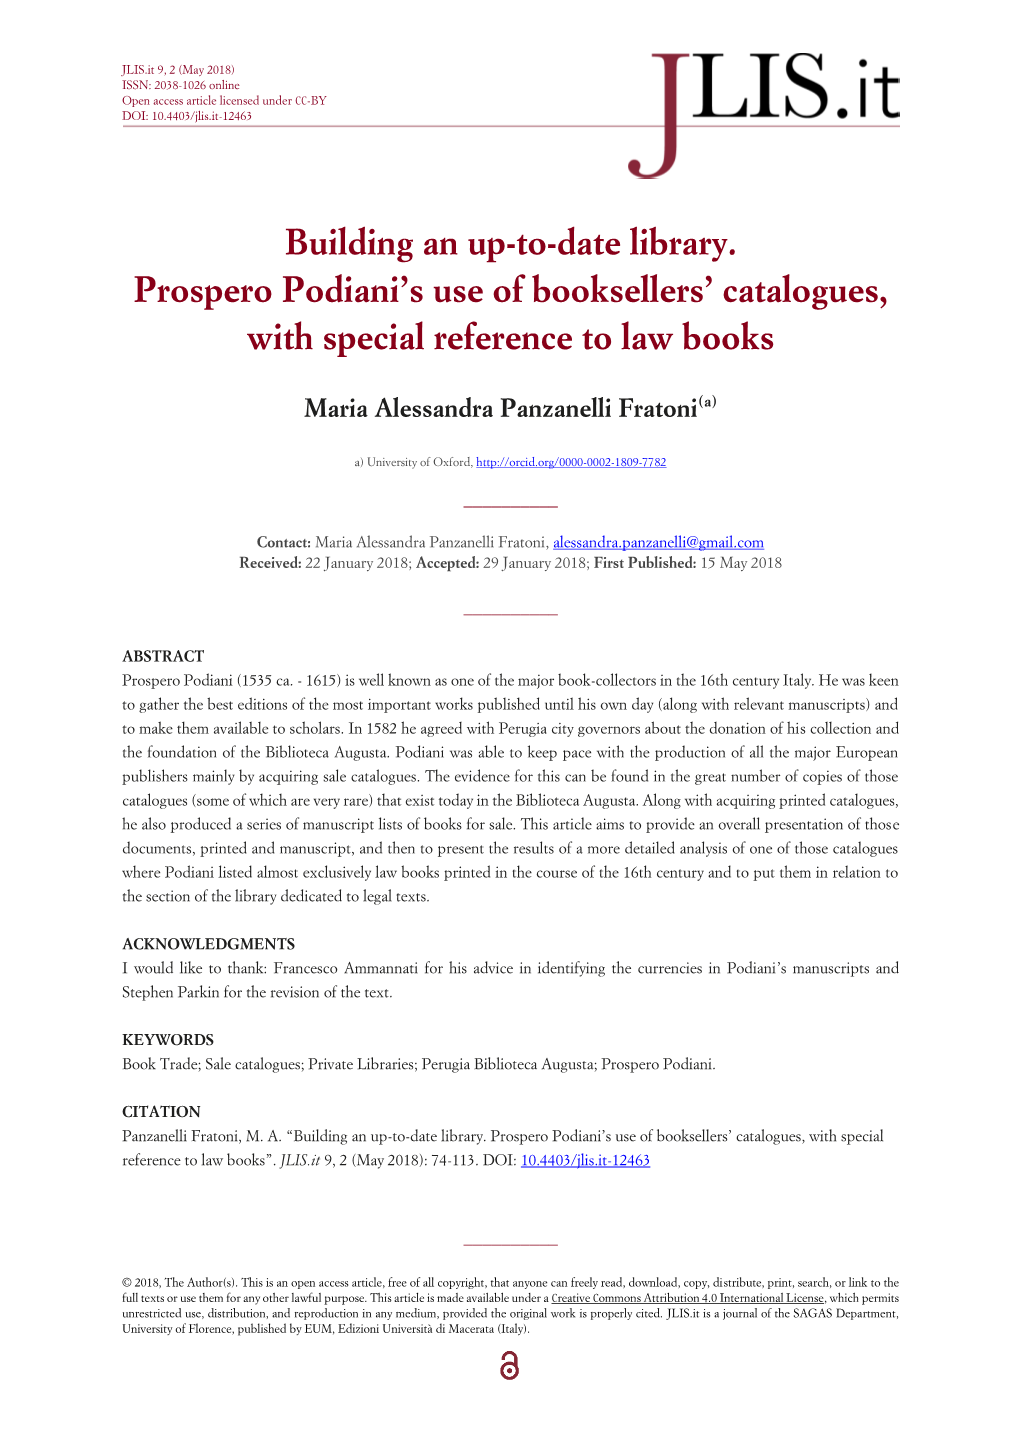 Building an Up-To-Date Library. Prospero Podiani's Use Of